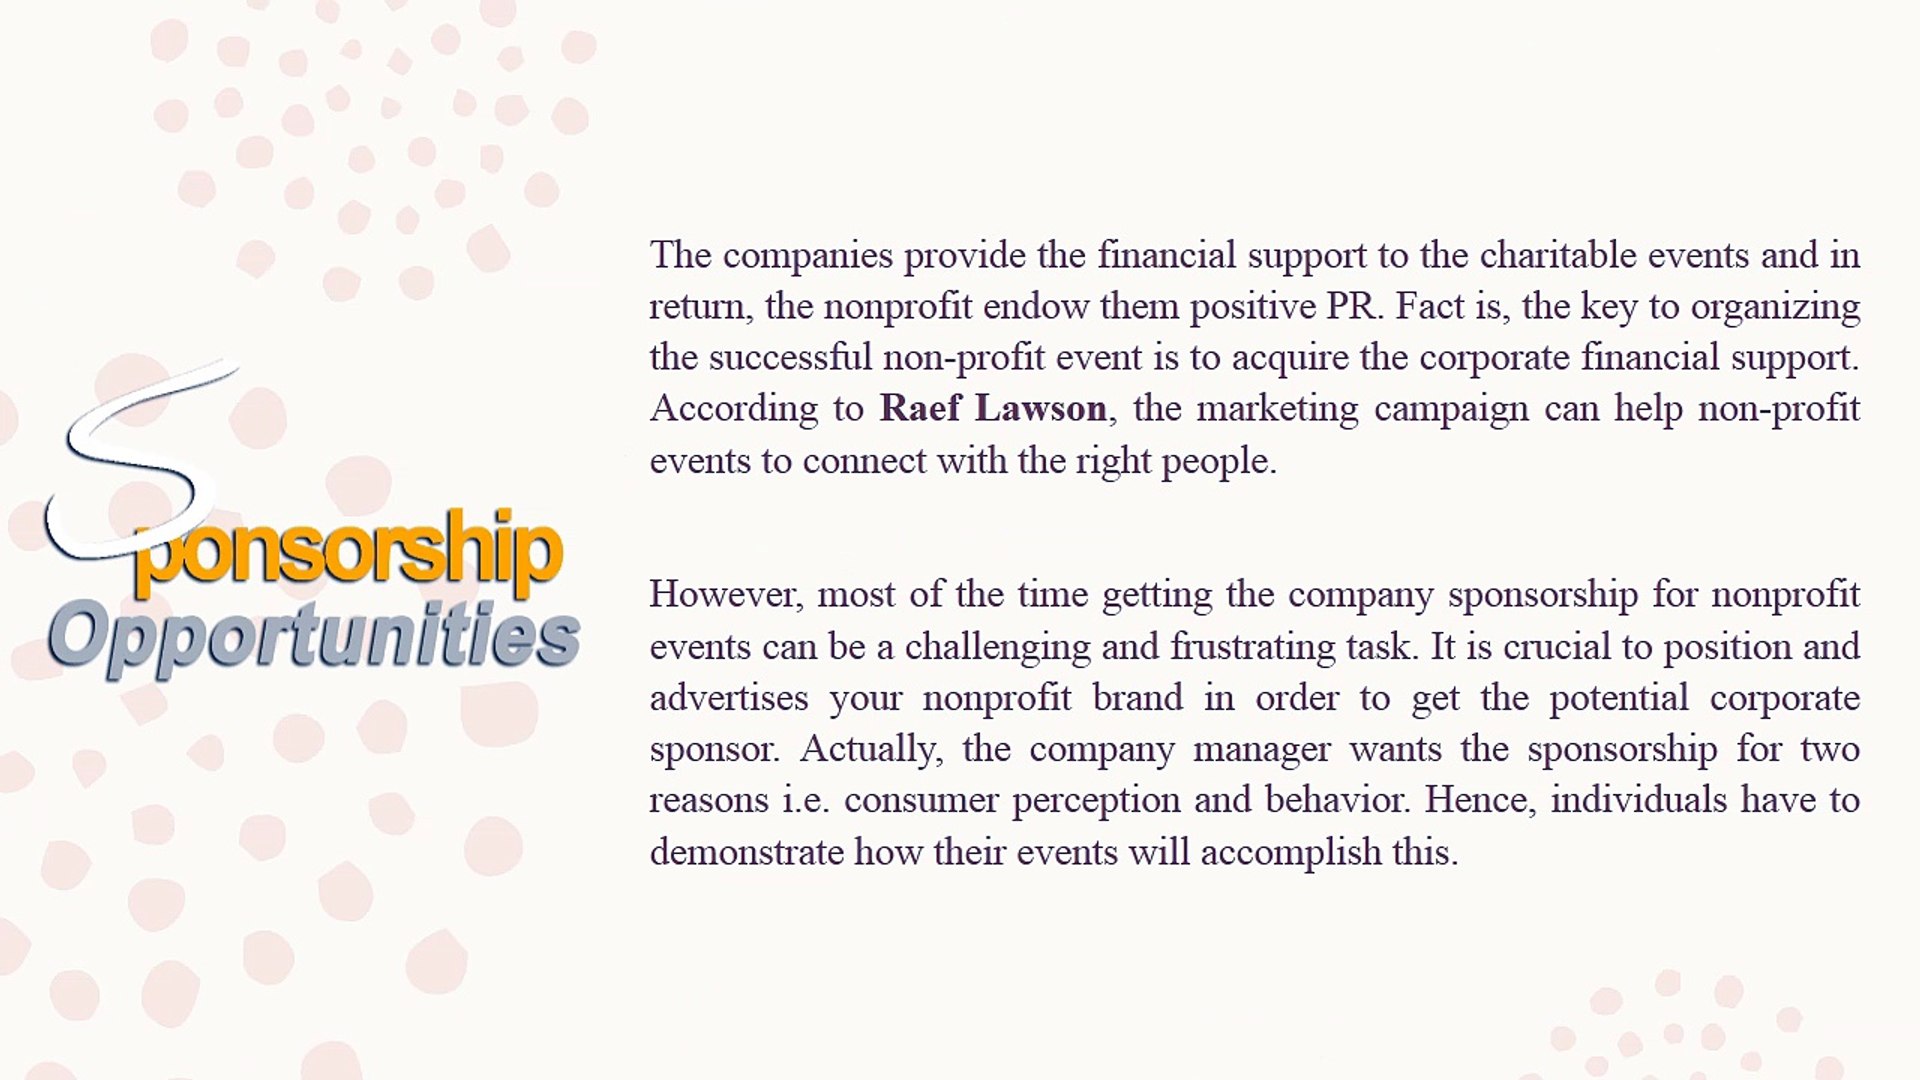 How to Get Corporate Sponsorship for Non-Profit Events